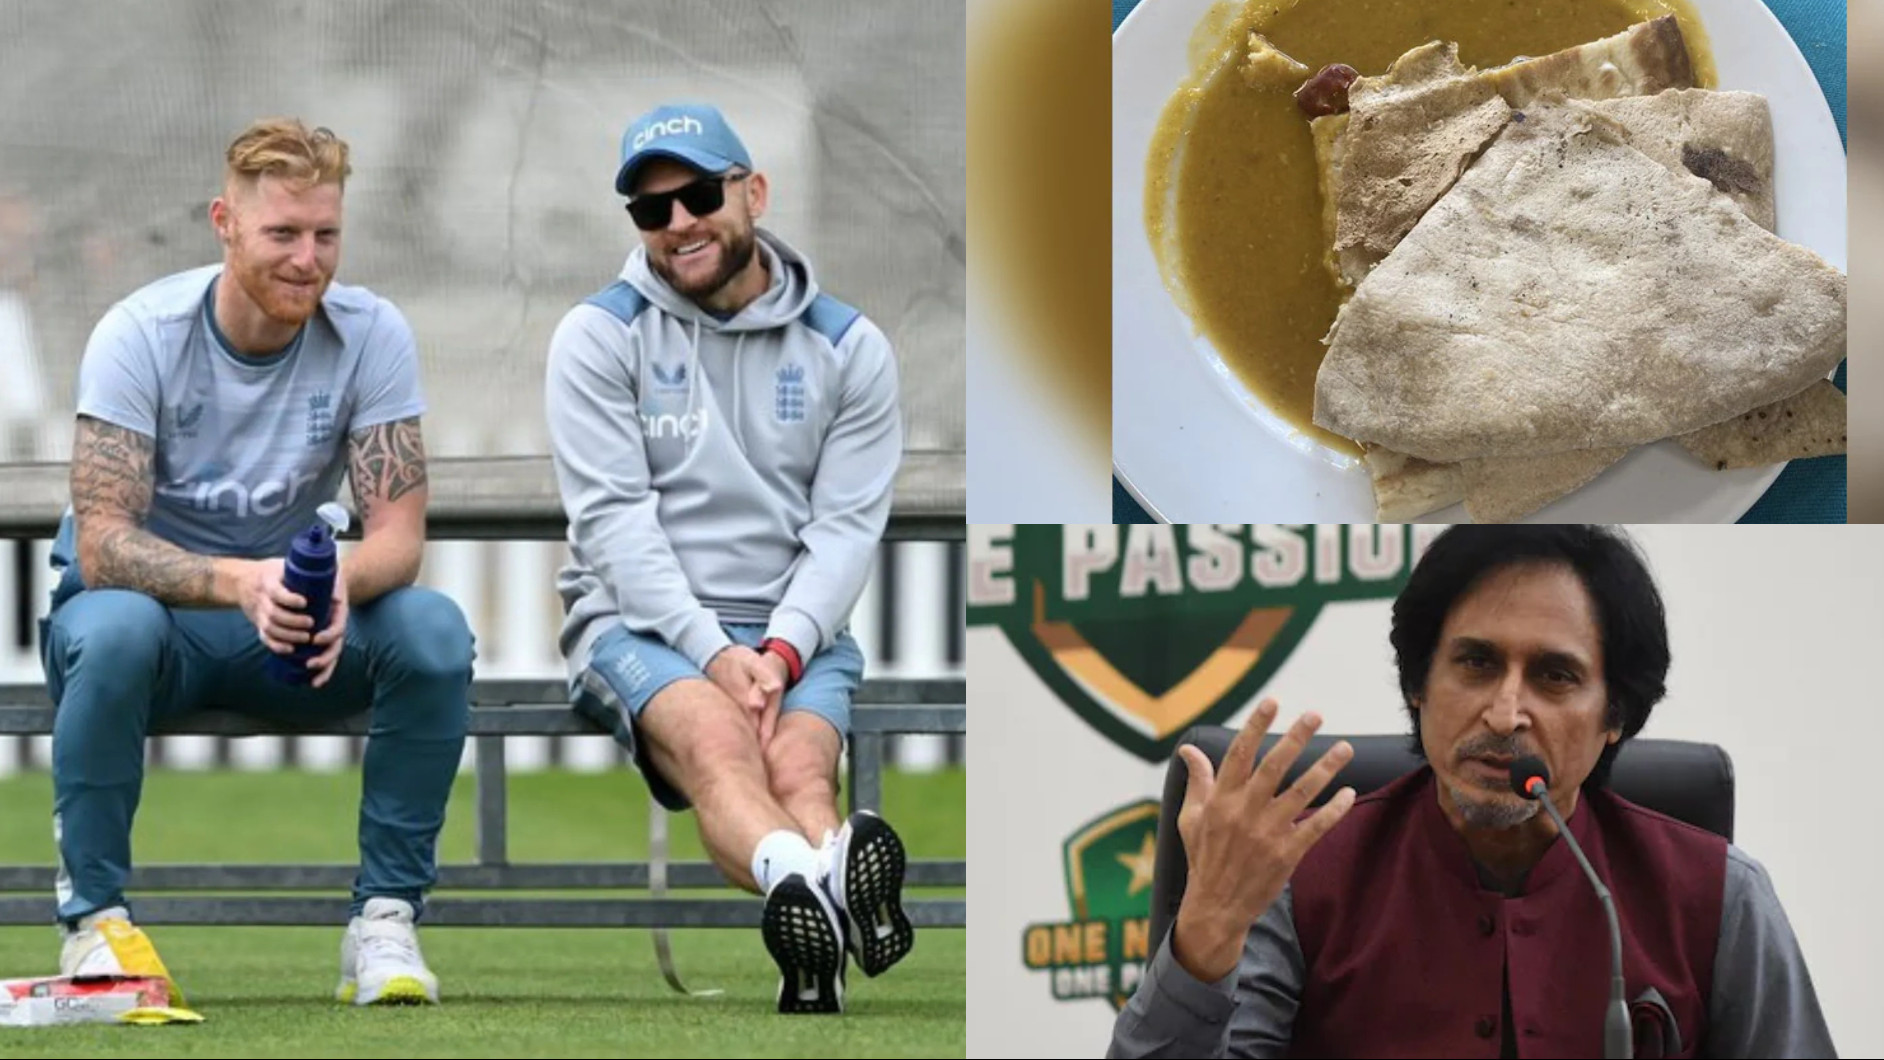 PAK v ENG 2022: England hires team chef in midst of catering concerns on upcoming Pakistan Test tour